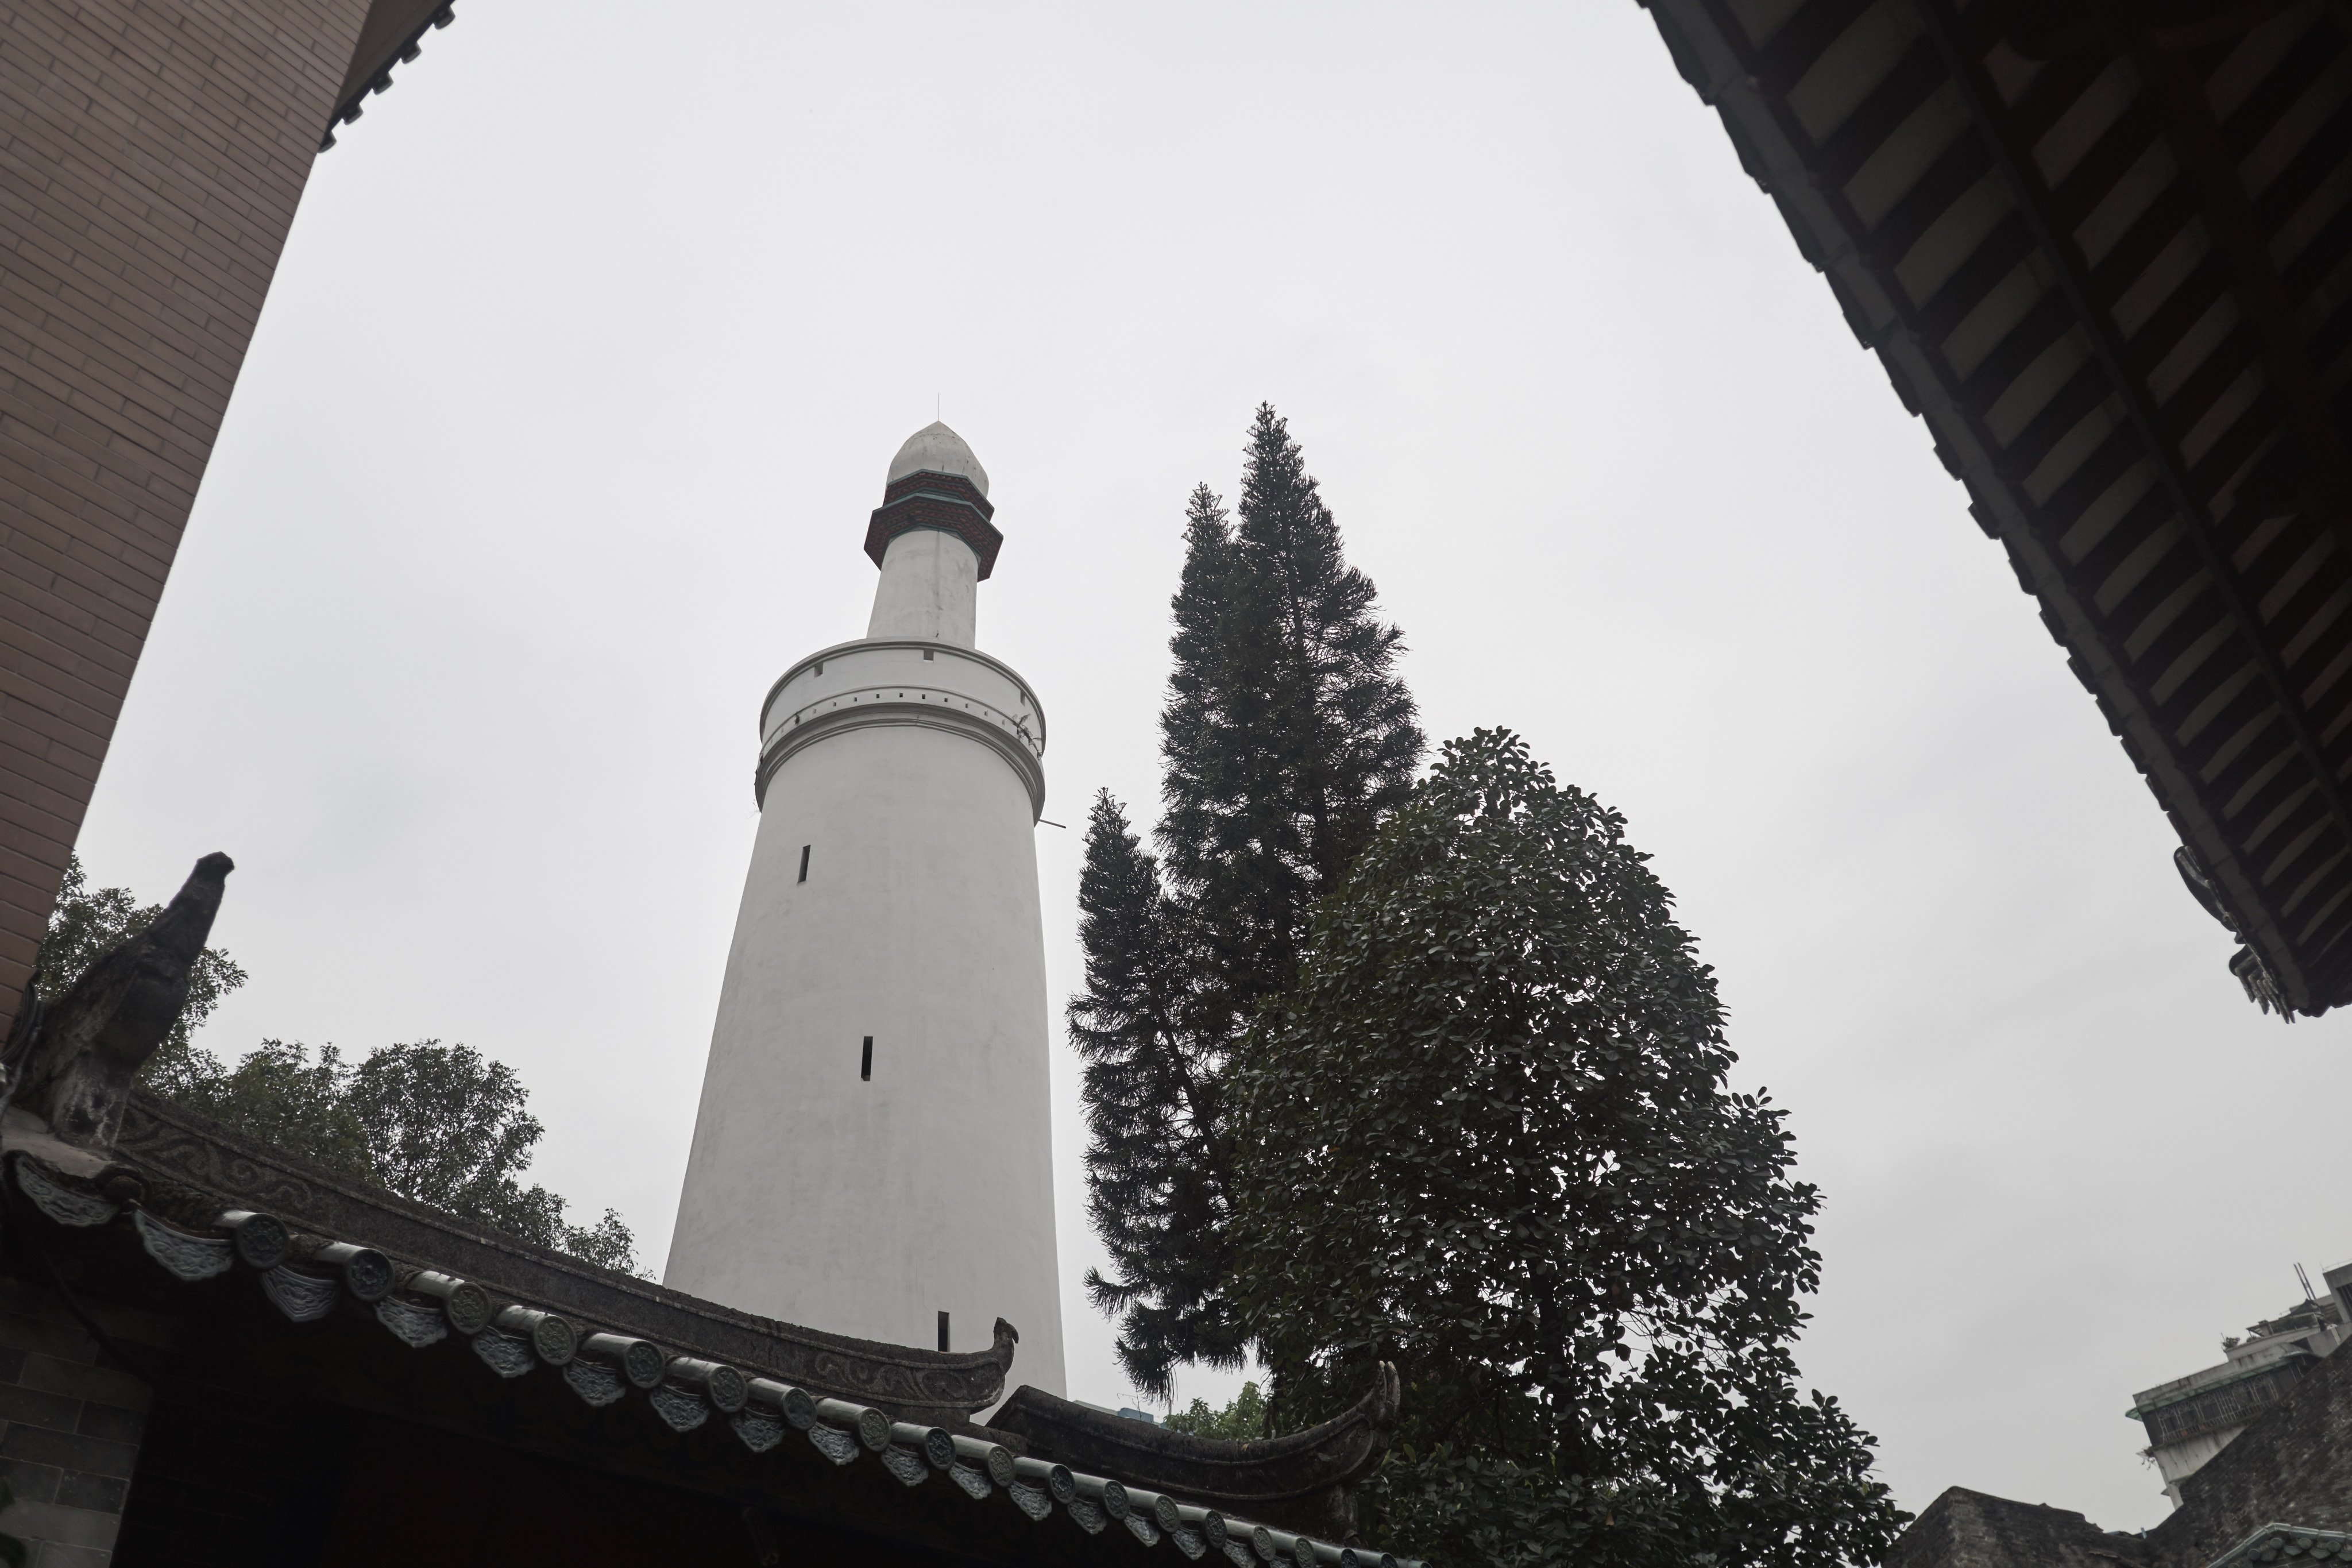 The lighthouse-style minaret of the historic Huaisheng Mosque in Guangzhou, China. Photo: Shutterstock